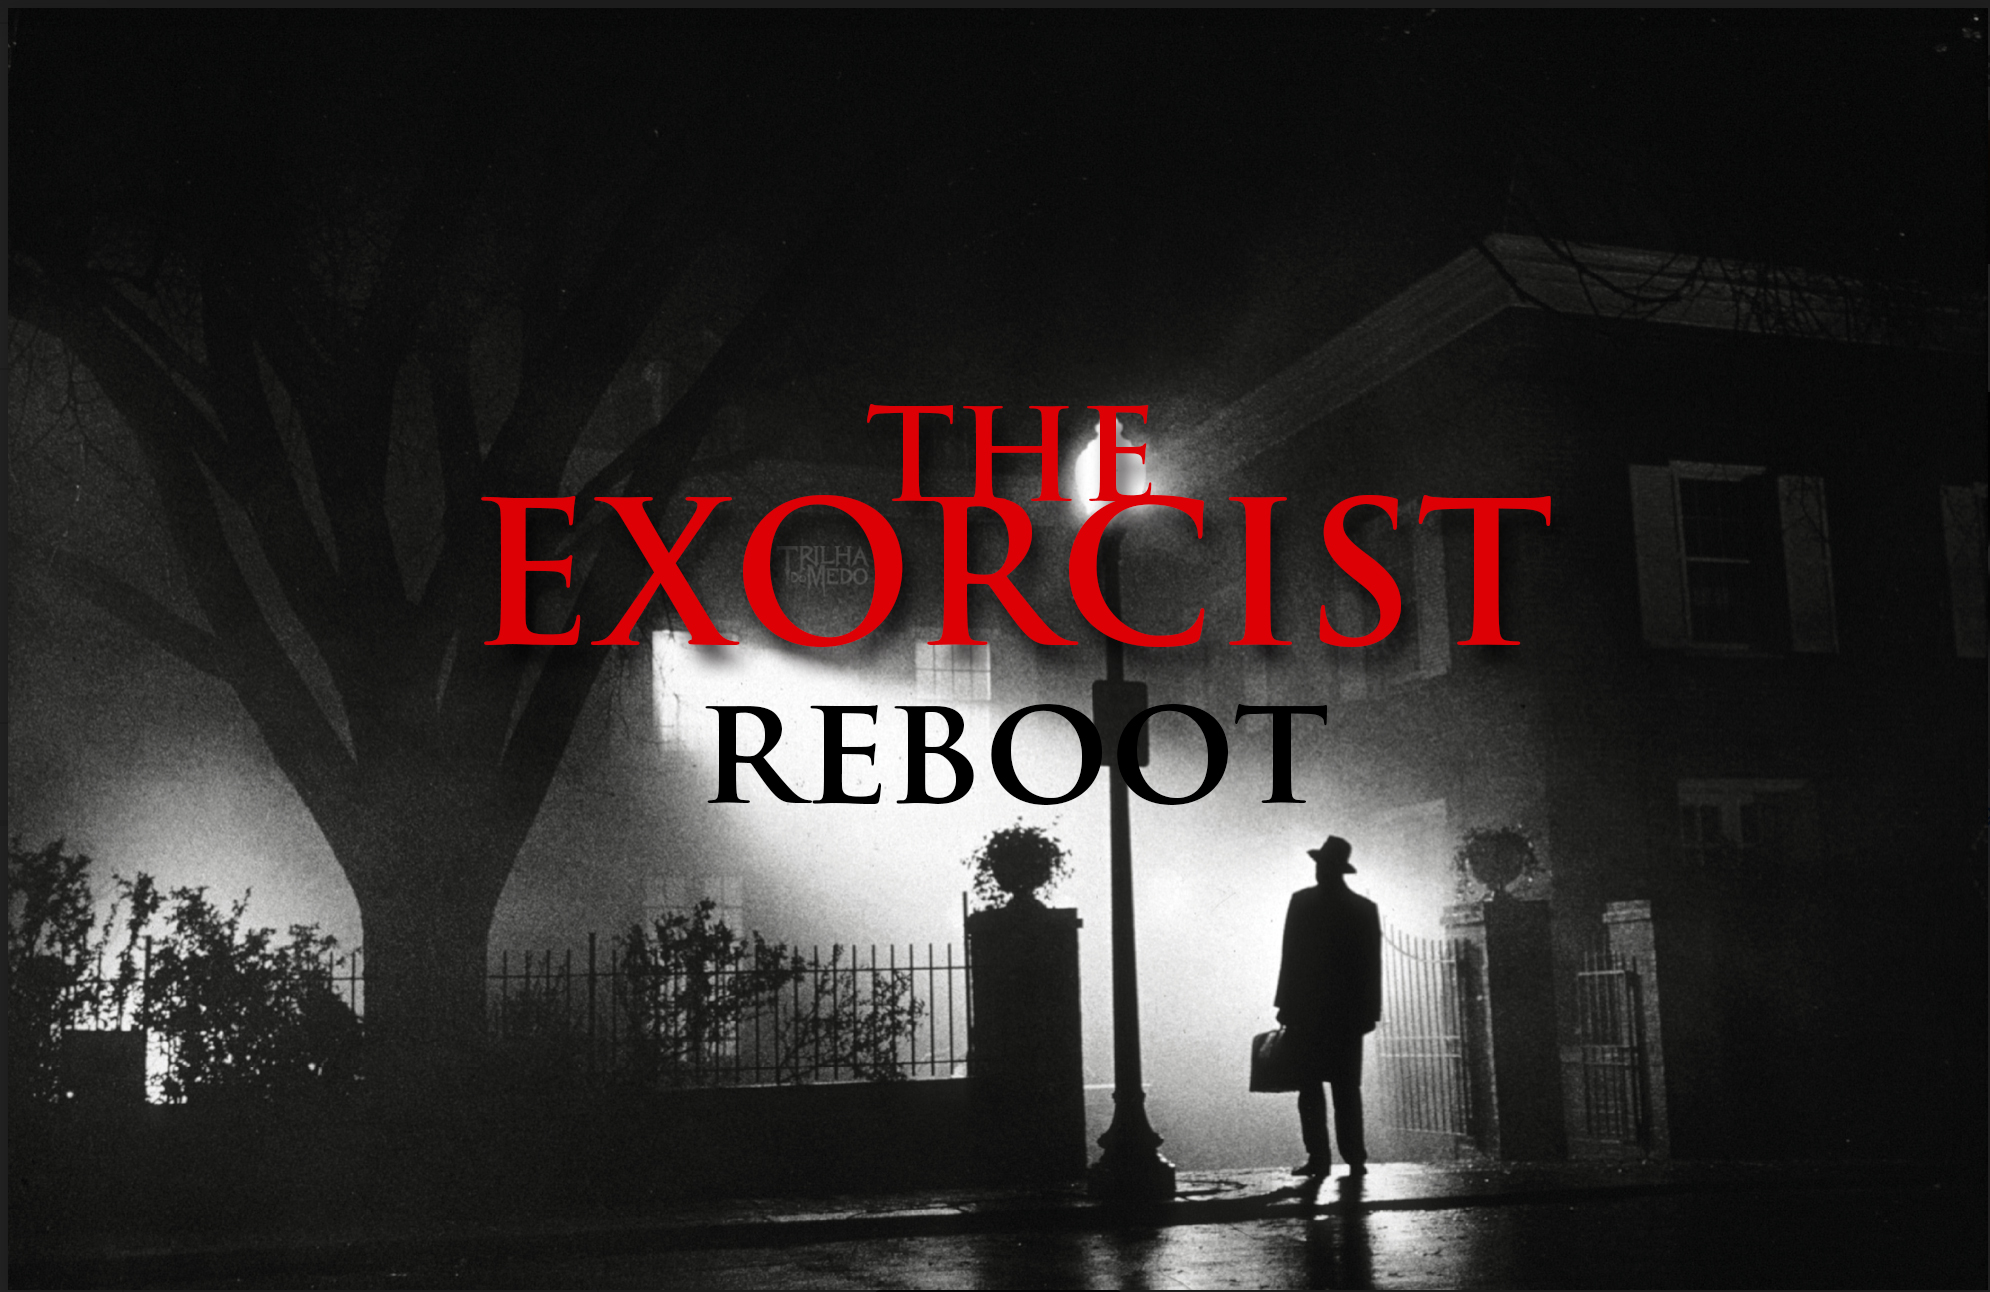 The Exorcist 2021 A reboot of The Exorcist is on the way for 2021